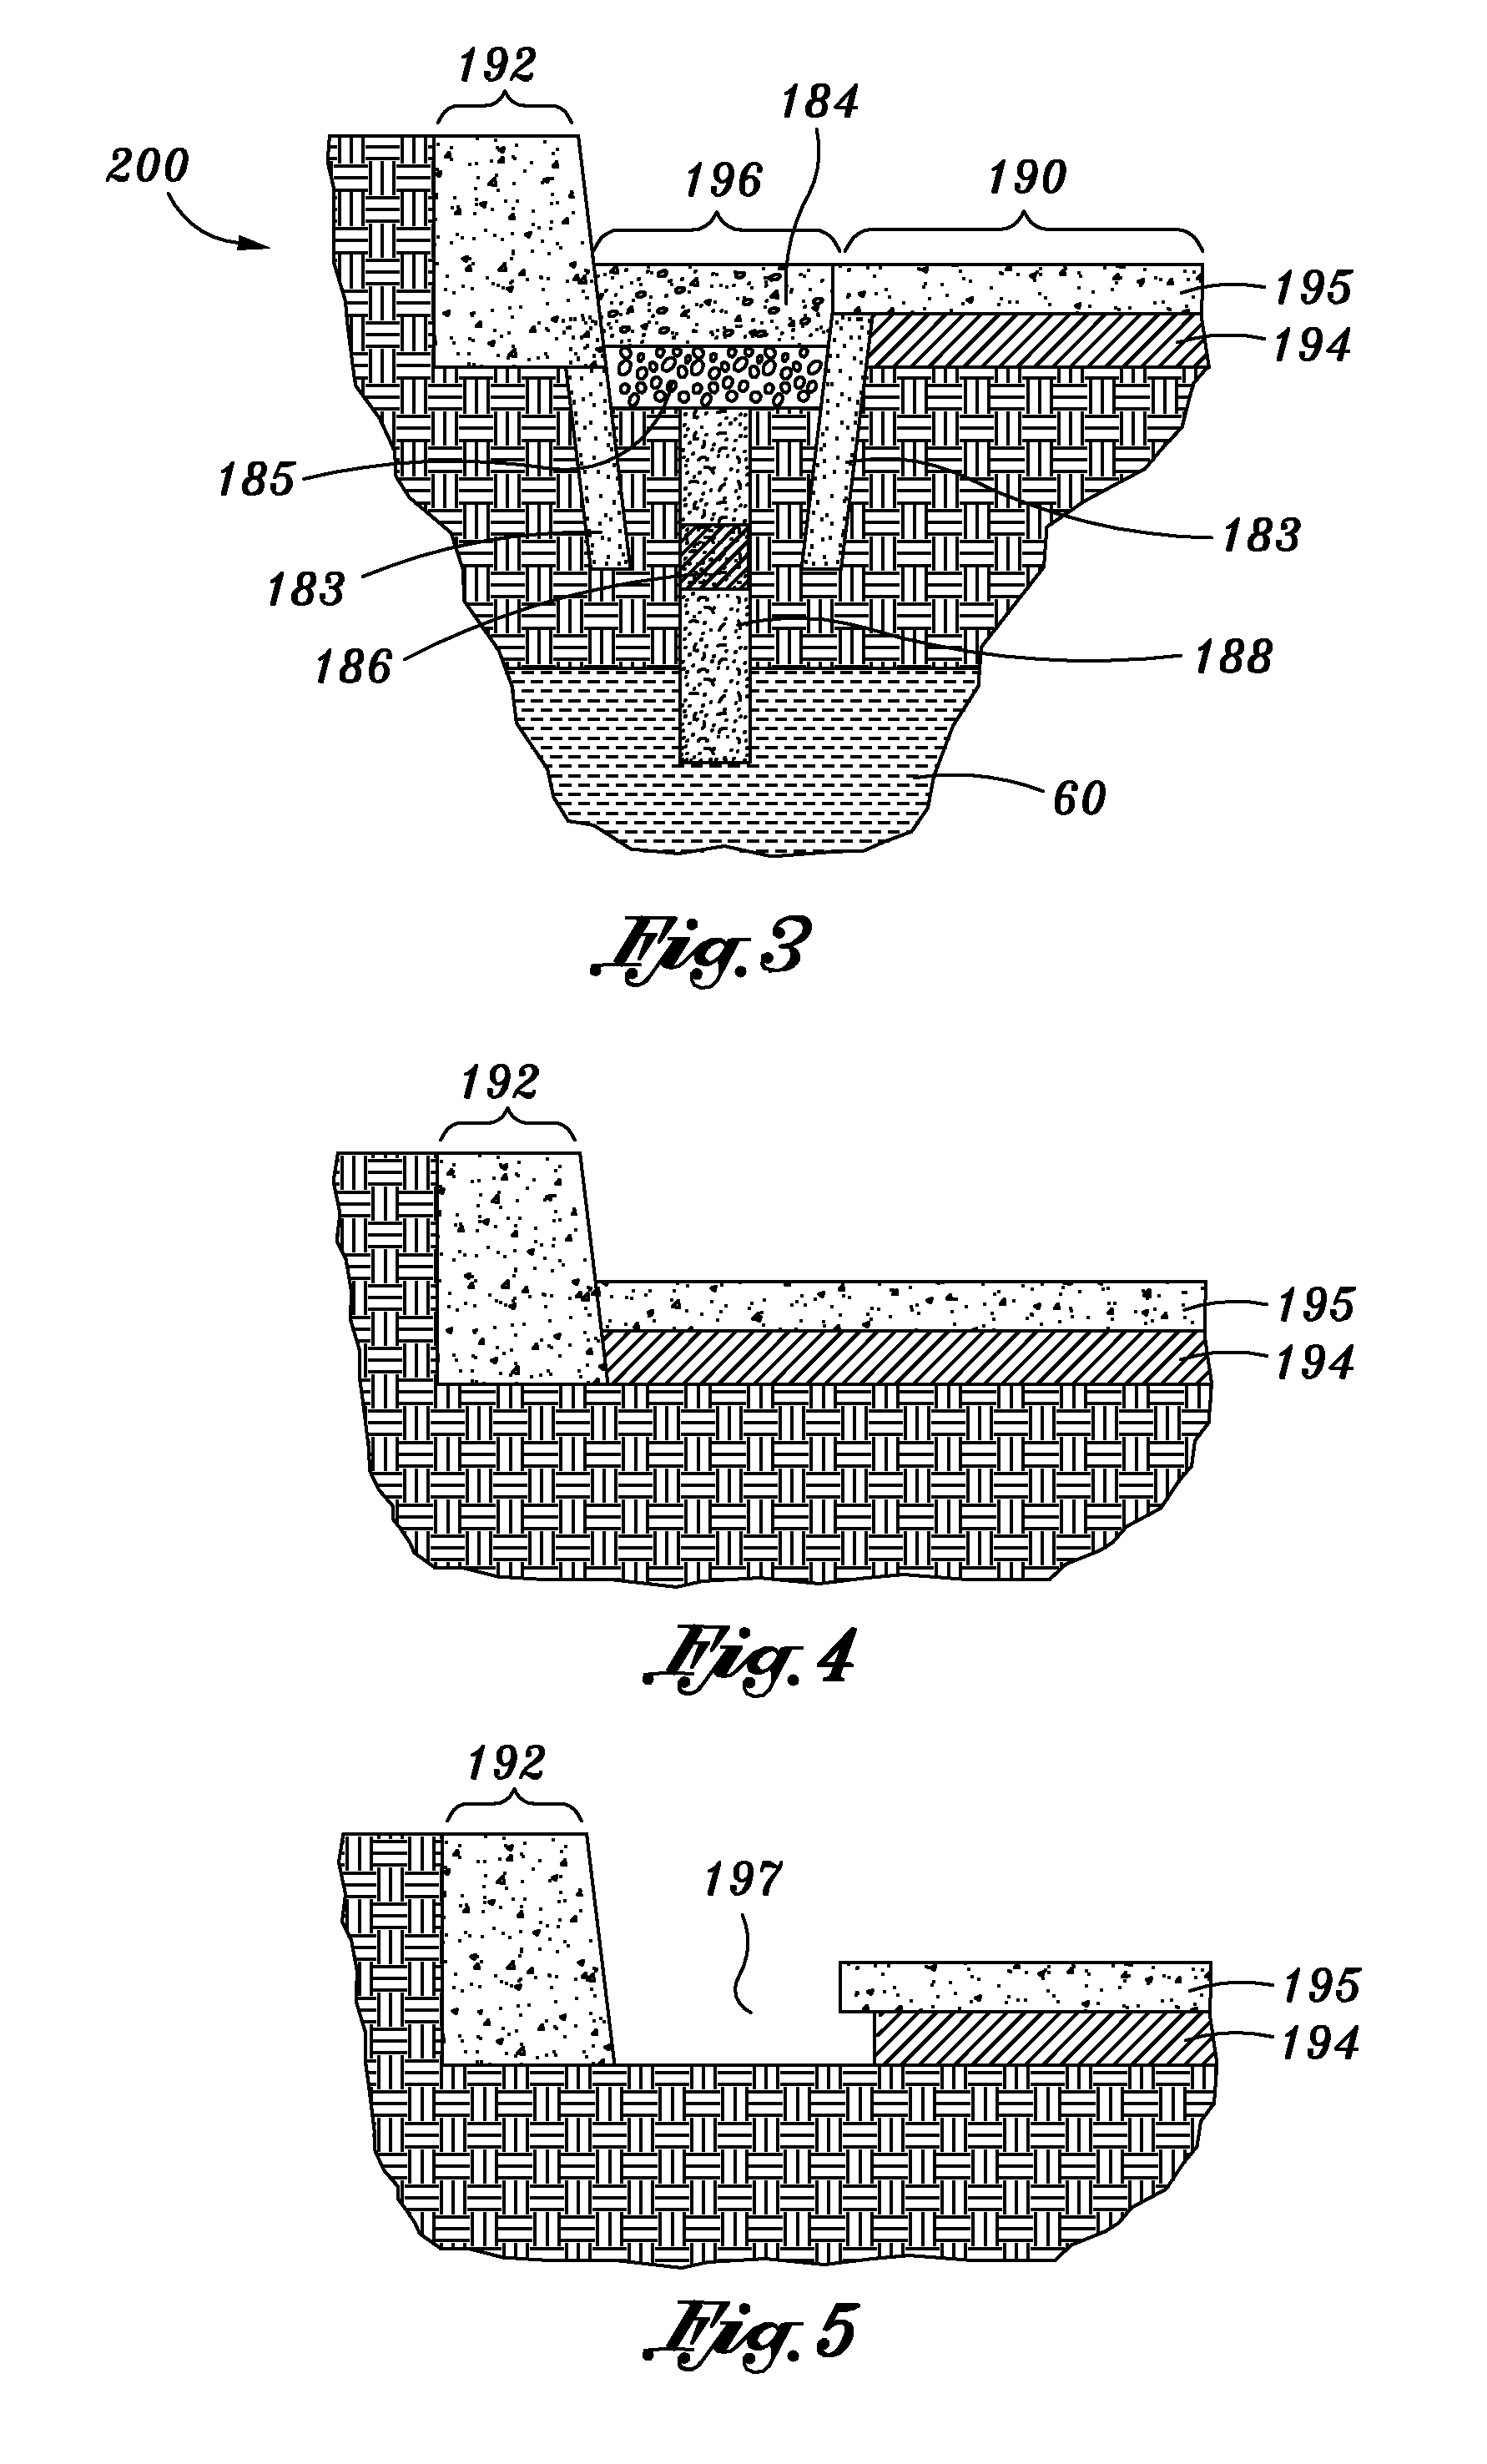 Aquifer replenishment system with filter